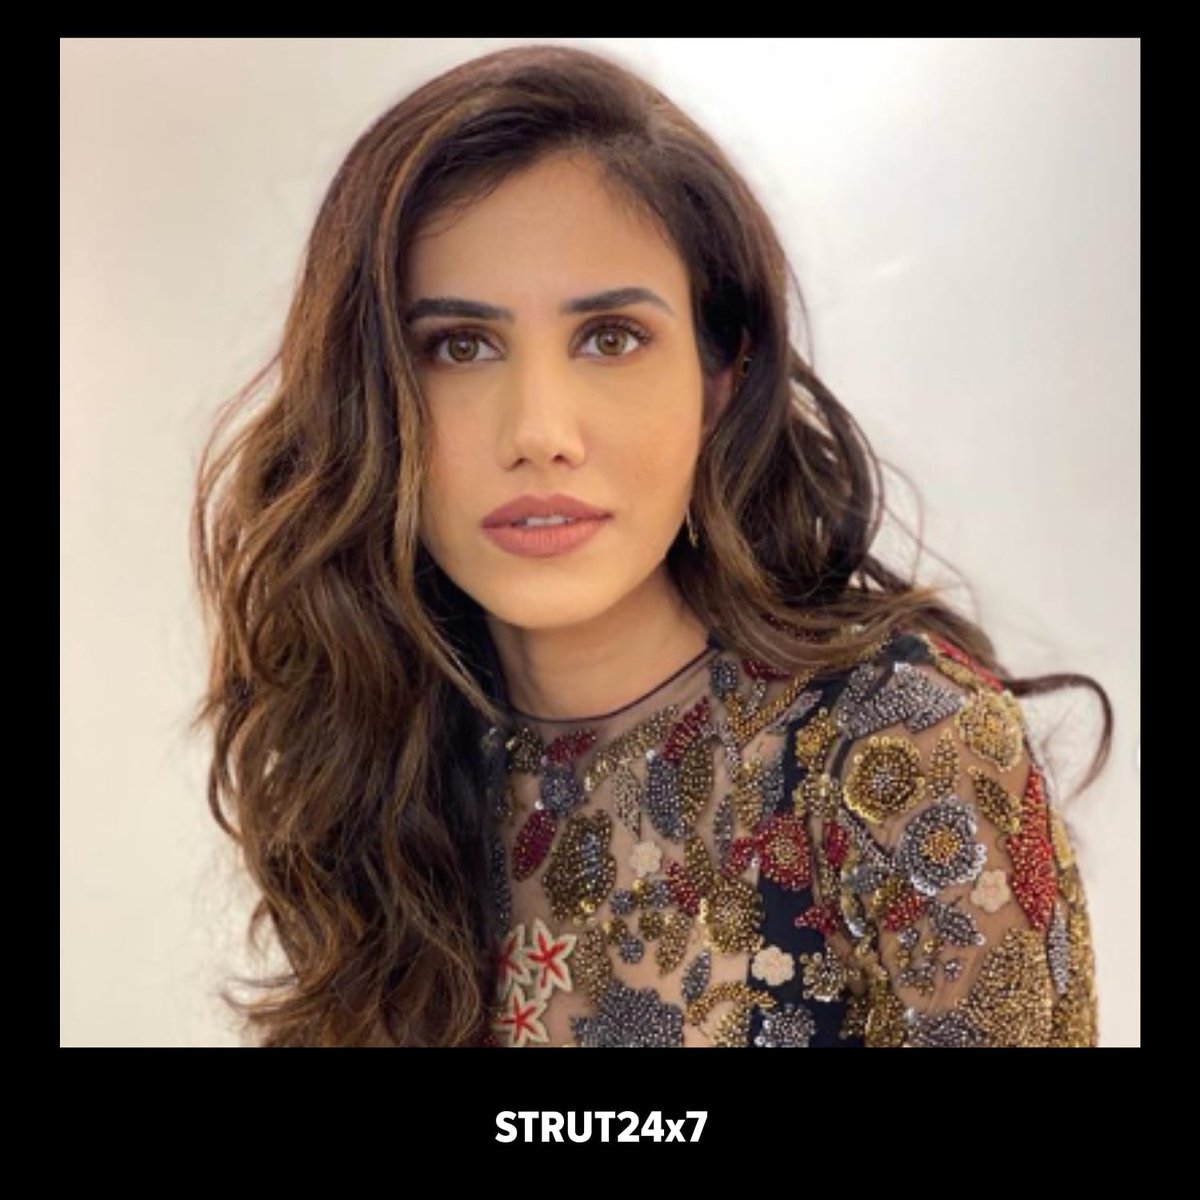 Sharp as an arrow #SaniyaShadadpuri
The beautifully done brows with eye makeup on point and lush brown lipstick is stunning☀ for @SonnalliSeygall

#SharpEyebrow #MakeupOnPoint #BrownLipstick #SonaliSeygal #Strut24x7